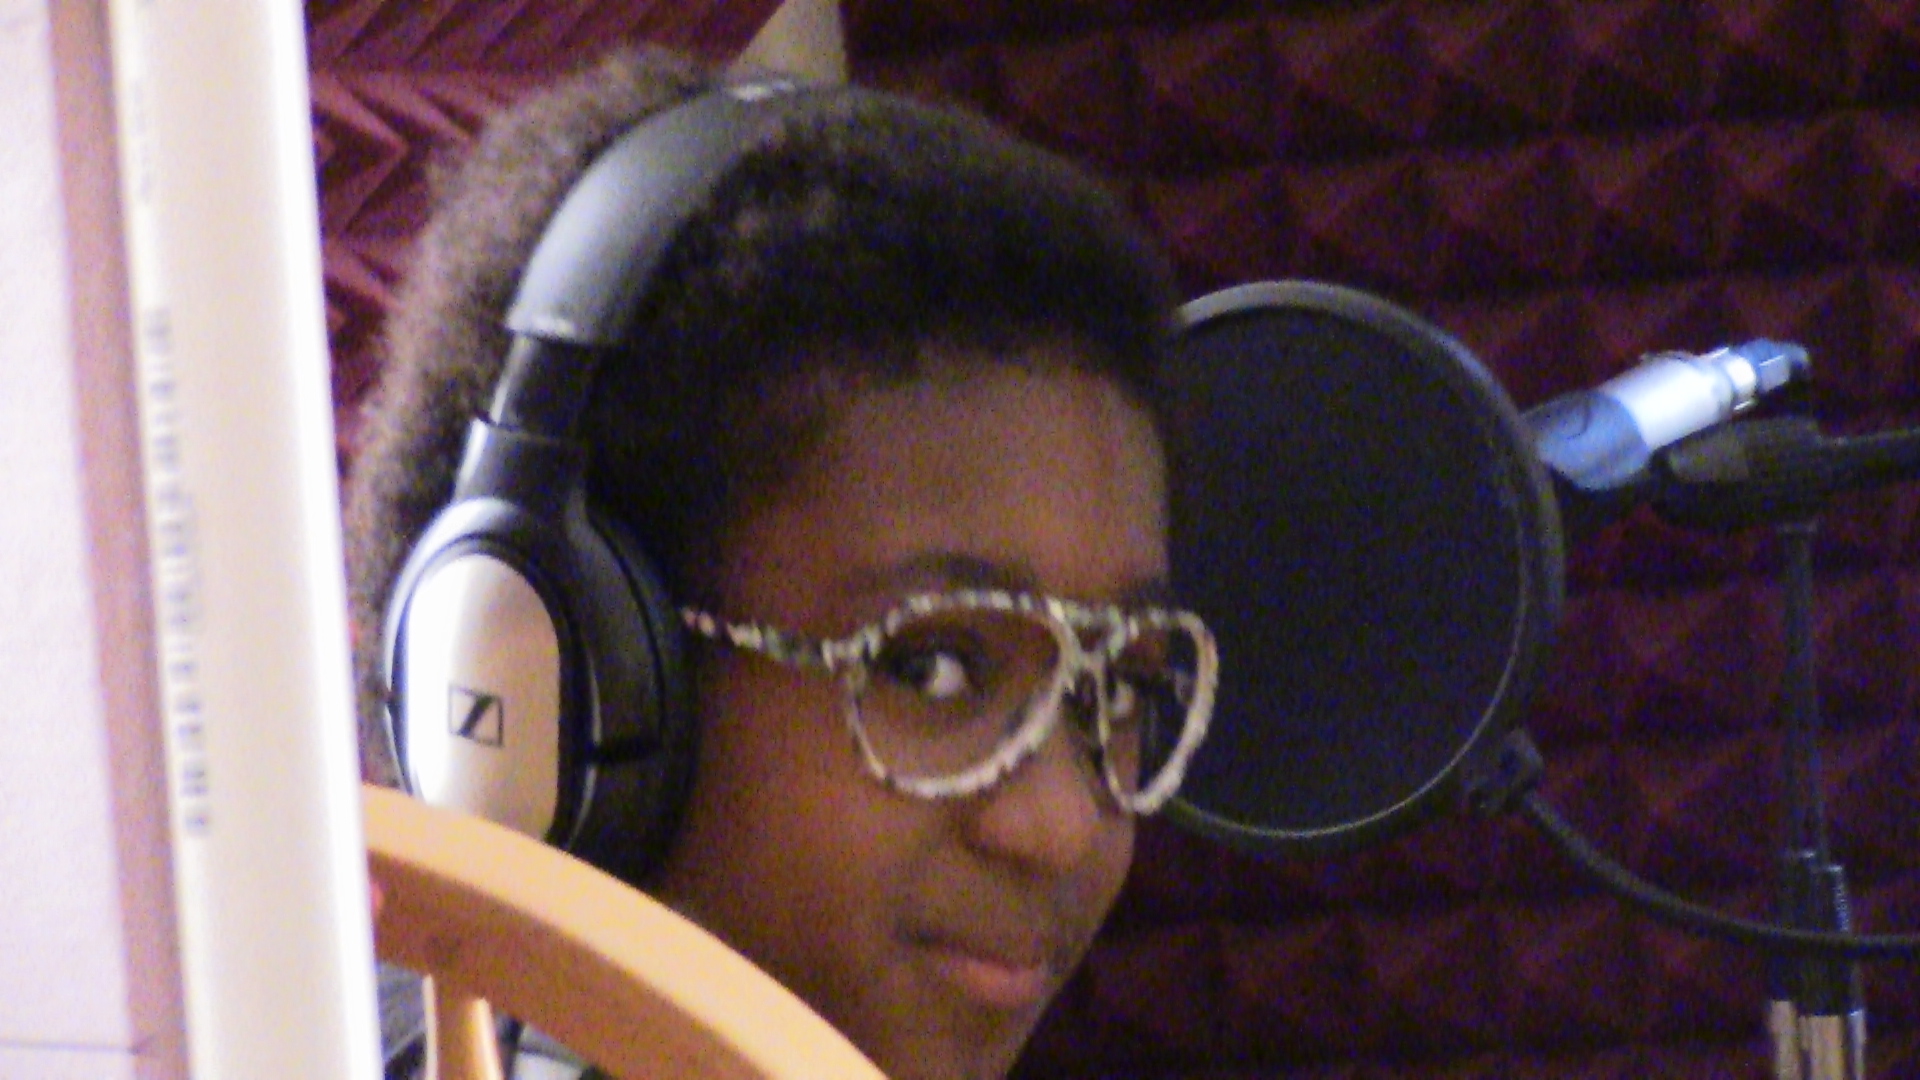 me recording lines for the animated film Moose where I play the lead character.